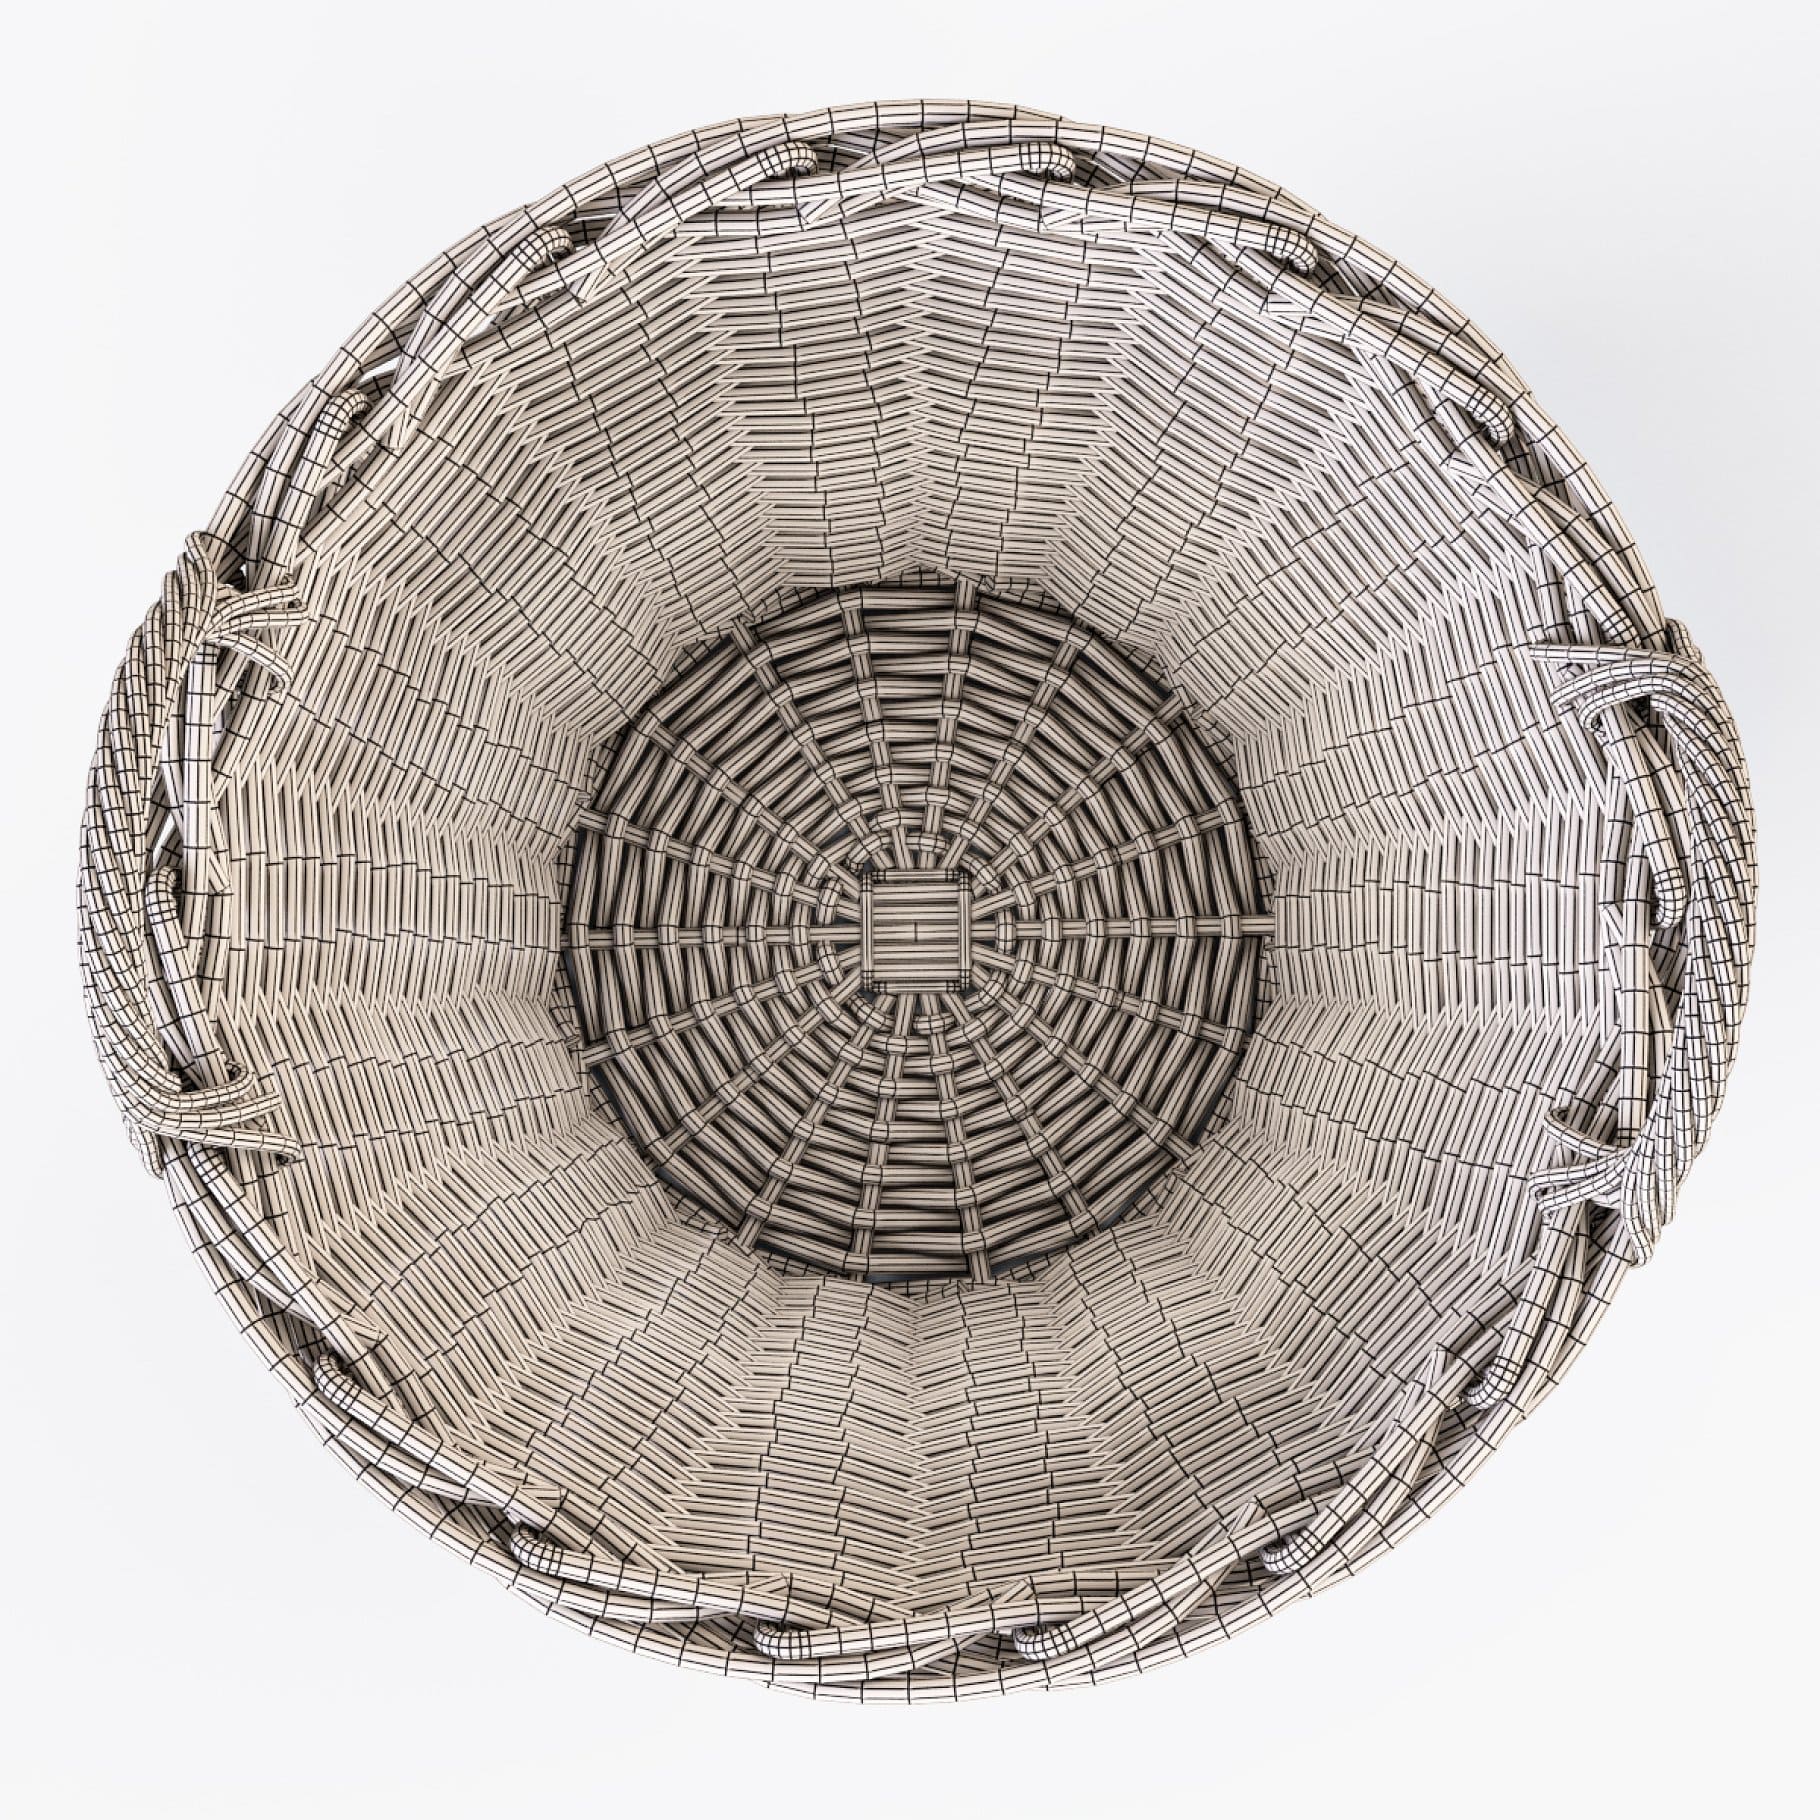 A basket made of thin and thick vines.